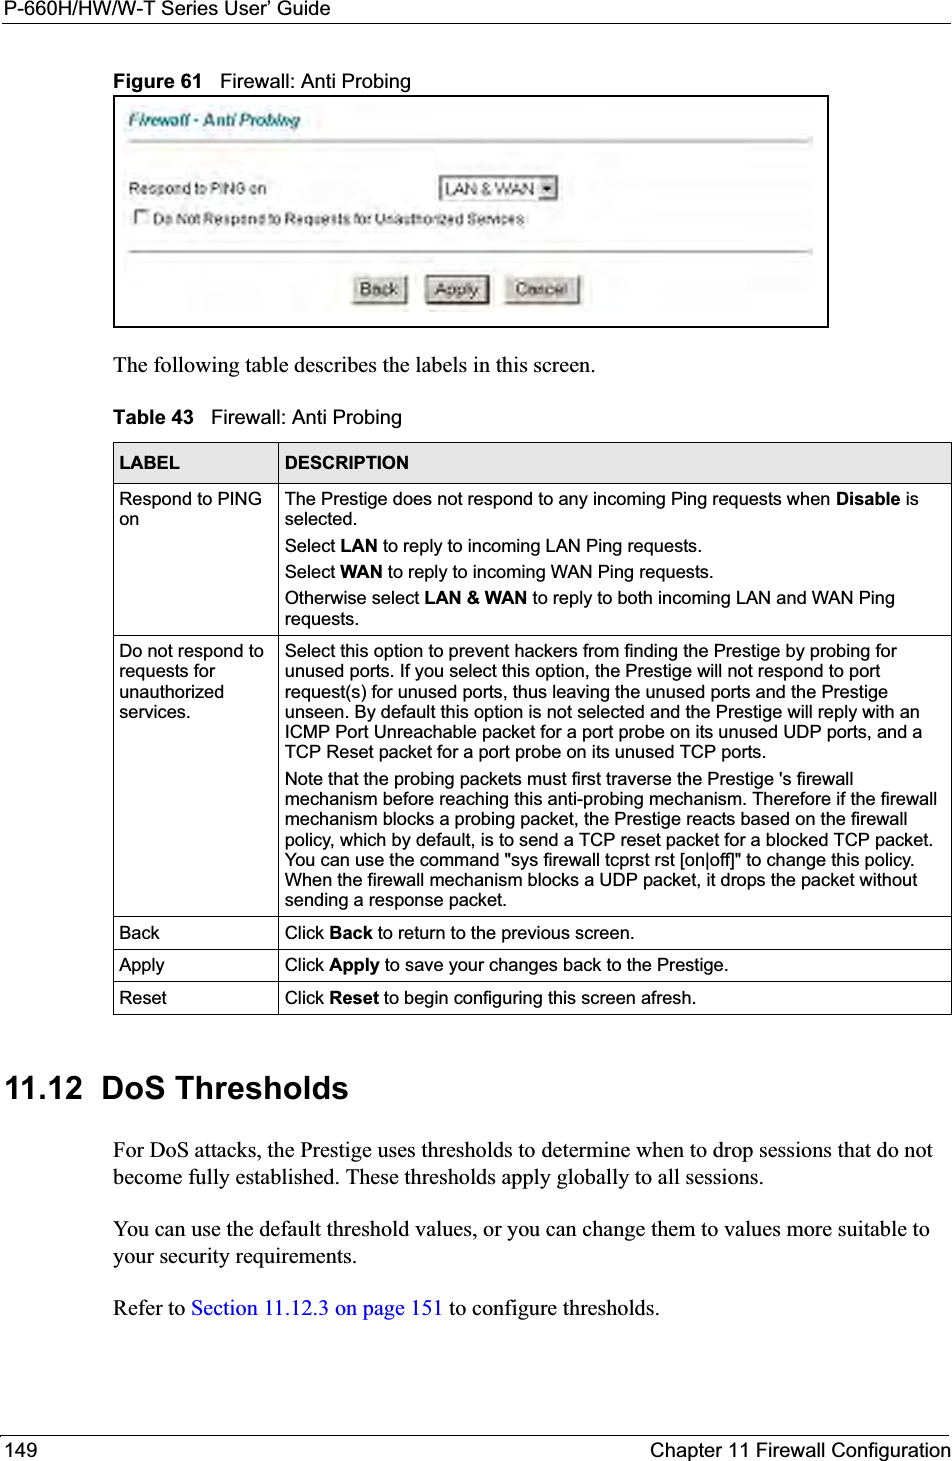 P-660H/HW/W-T Series User’ Guide149 Chapter 11 Firewall ConfigurationFigure 61   Firewall: Anti ProbingThe following table describes the labels in this screen.11.12  DoS Thresholds For DoS attacks, the Prestige uses thresholds to determine when to drop sessions that do not become fully established. These thresholds apply globally to all sessions.You can use the default threshold values, or you can change them to values more suitable to your security requirements.Refer to Section 11.12.3 on page 151 to configure thresholds.  Table 43   Firewall: Anti ProbingLABEL DESCRIPTIONRespond to PING onThe Prestige does not respond to any incoming Ping requests when Disable is selected.Select LAN to reply to incoming LAN Ping requests.Select WAN to reply to incoming WAN Ping requests. Otherwise select LAN &amp; WAN to reply to both incoming LAN and WAN Ping requests. Do not respond to requests for unauthorized services.Select this option to prevent hackers from finding the Prestige by probing for unused ports. If you select this option, the Prestige will not respond to port request(s) for unused ports, thus leaving the unused ports and the Prestige unseen. By default this option is not selected and the Prestige will reply with an ICMP Port Unreachable packet for a port probe on its unused UDP ports, and a TCP Reset packet for a port probe on its unused TCP ports. Note that the probing packets must first traverse the Prestige &apos;s firewall mechanism before reaching this anti-probing mechanism. Therefore if the firewall mechanism blocks a probing packet, the Prestige reacts based on the firewall policy, which by default, is to send a TCP reset packet for a blocked TCP packet. You can use the command &quot;sys firewall tcprst rst [on|off]&quot; to change this policy. When the firewall mechanism blocks a UDP packet, it drops the packet without sending a response packet.Back Click Back to return to the previous screen. Apply Click Apply to save your changes back to the Prestige.Reset Click Reset to begin configuring this screen afresh.